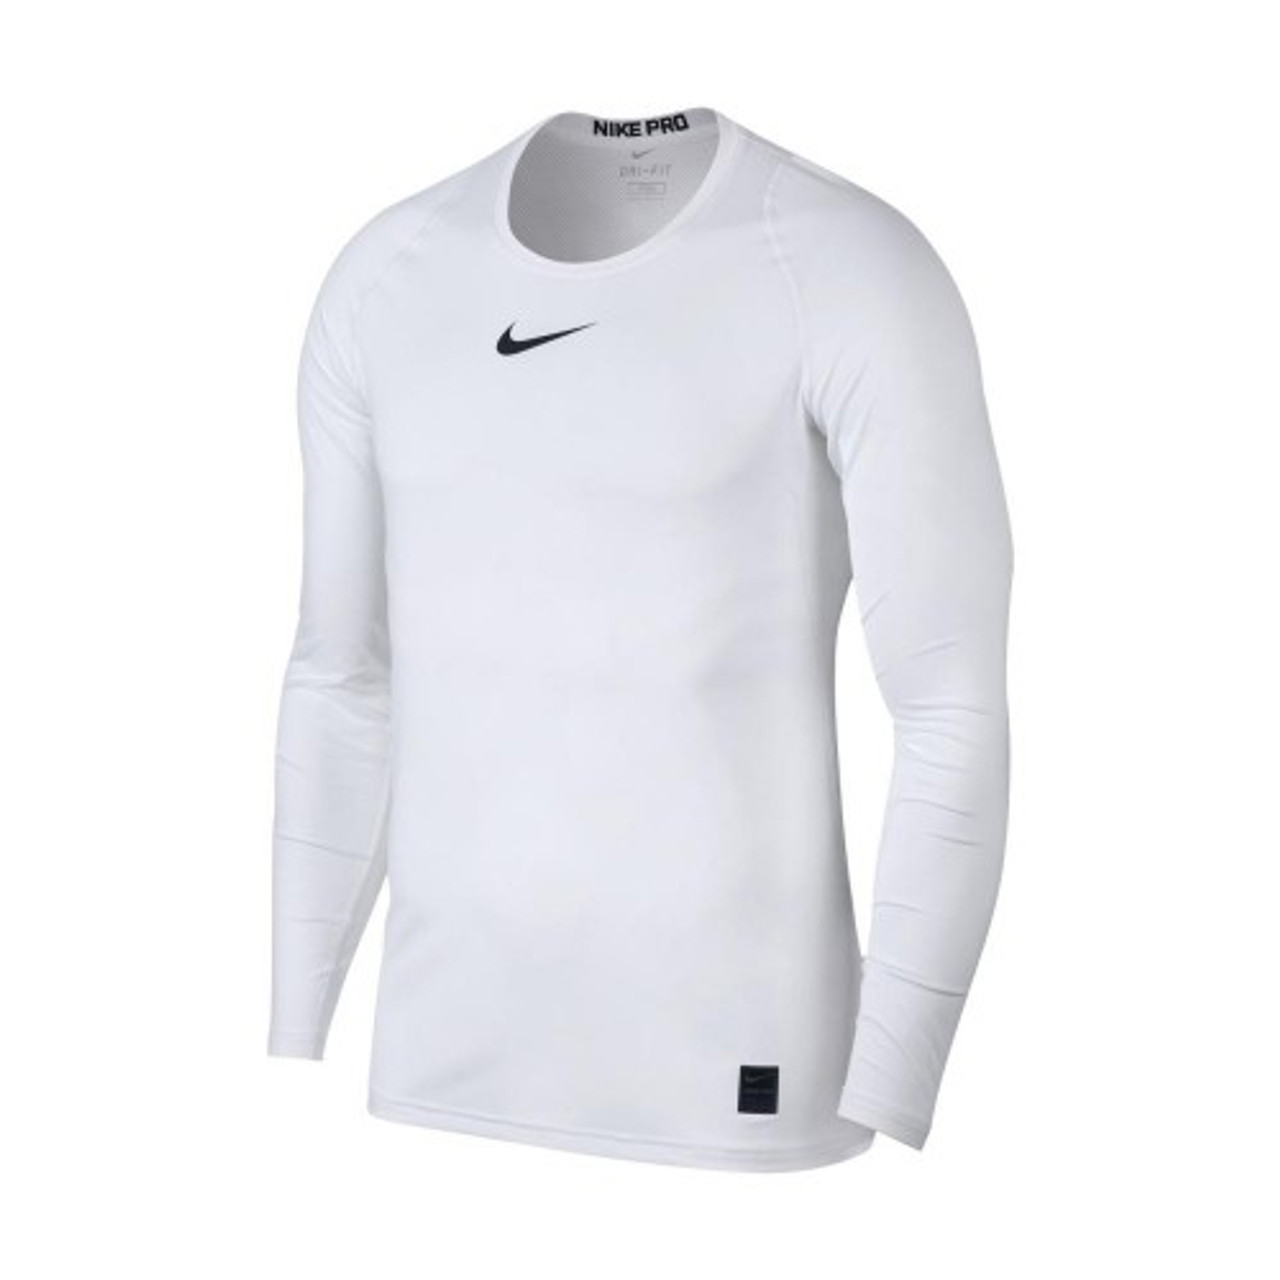 nike pro long sleeve compression top